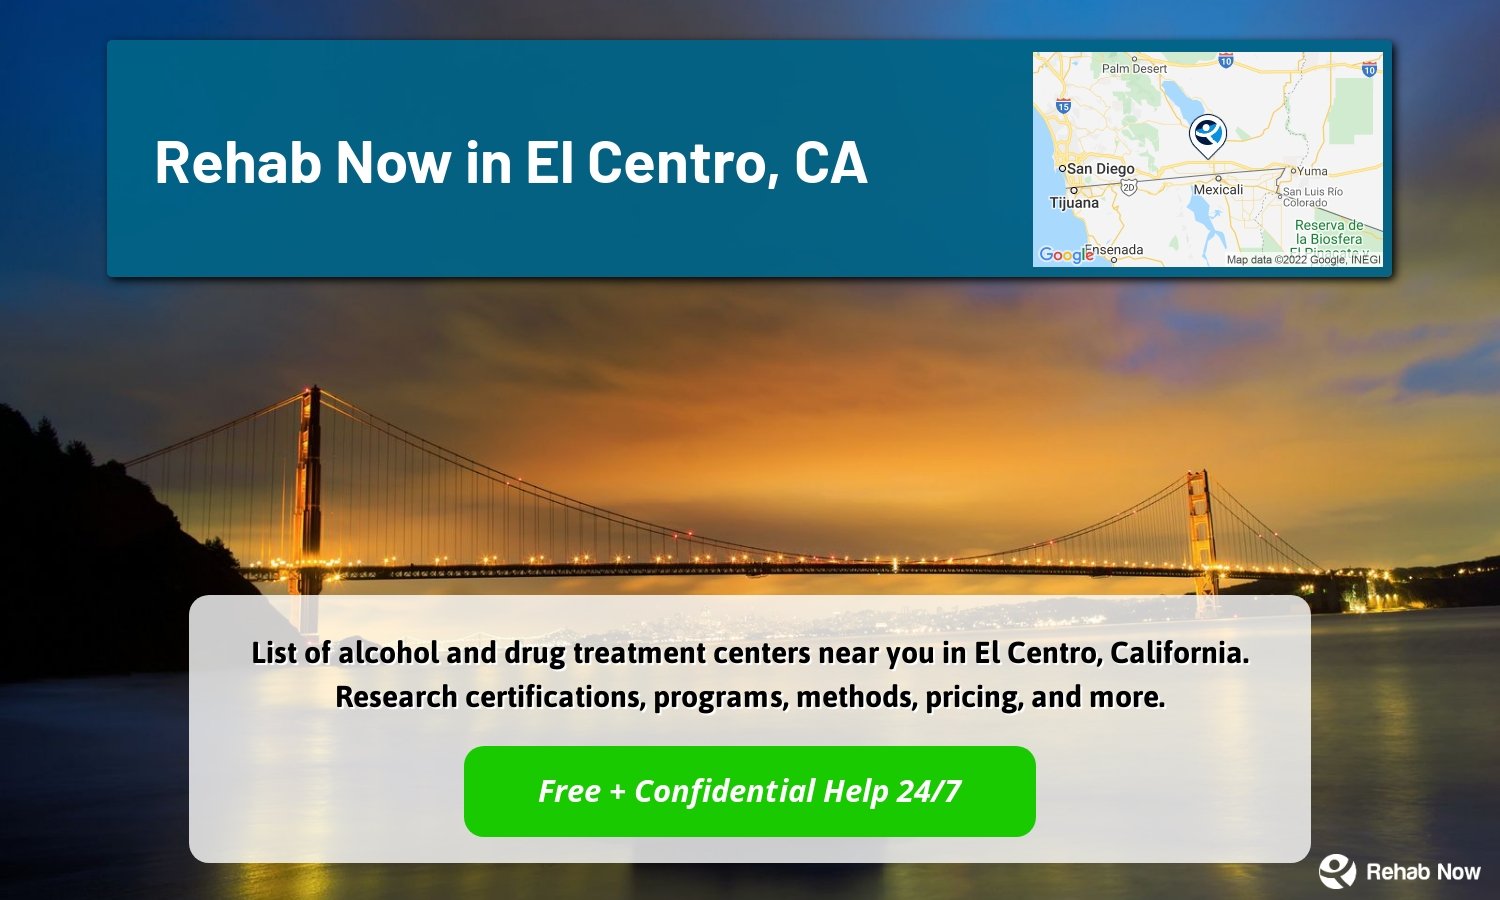 List of alcohol and drug treatment centers near you in El Centro, California. Research certifications, programs, methods, pricing, and more.